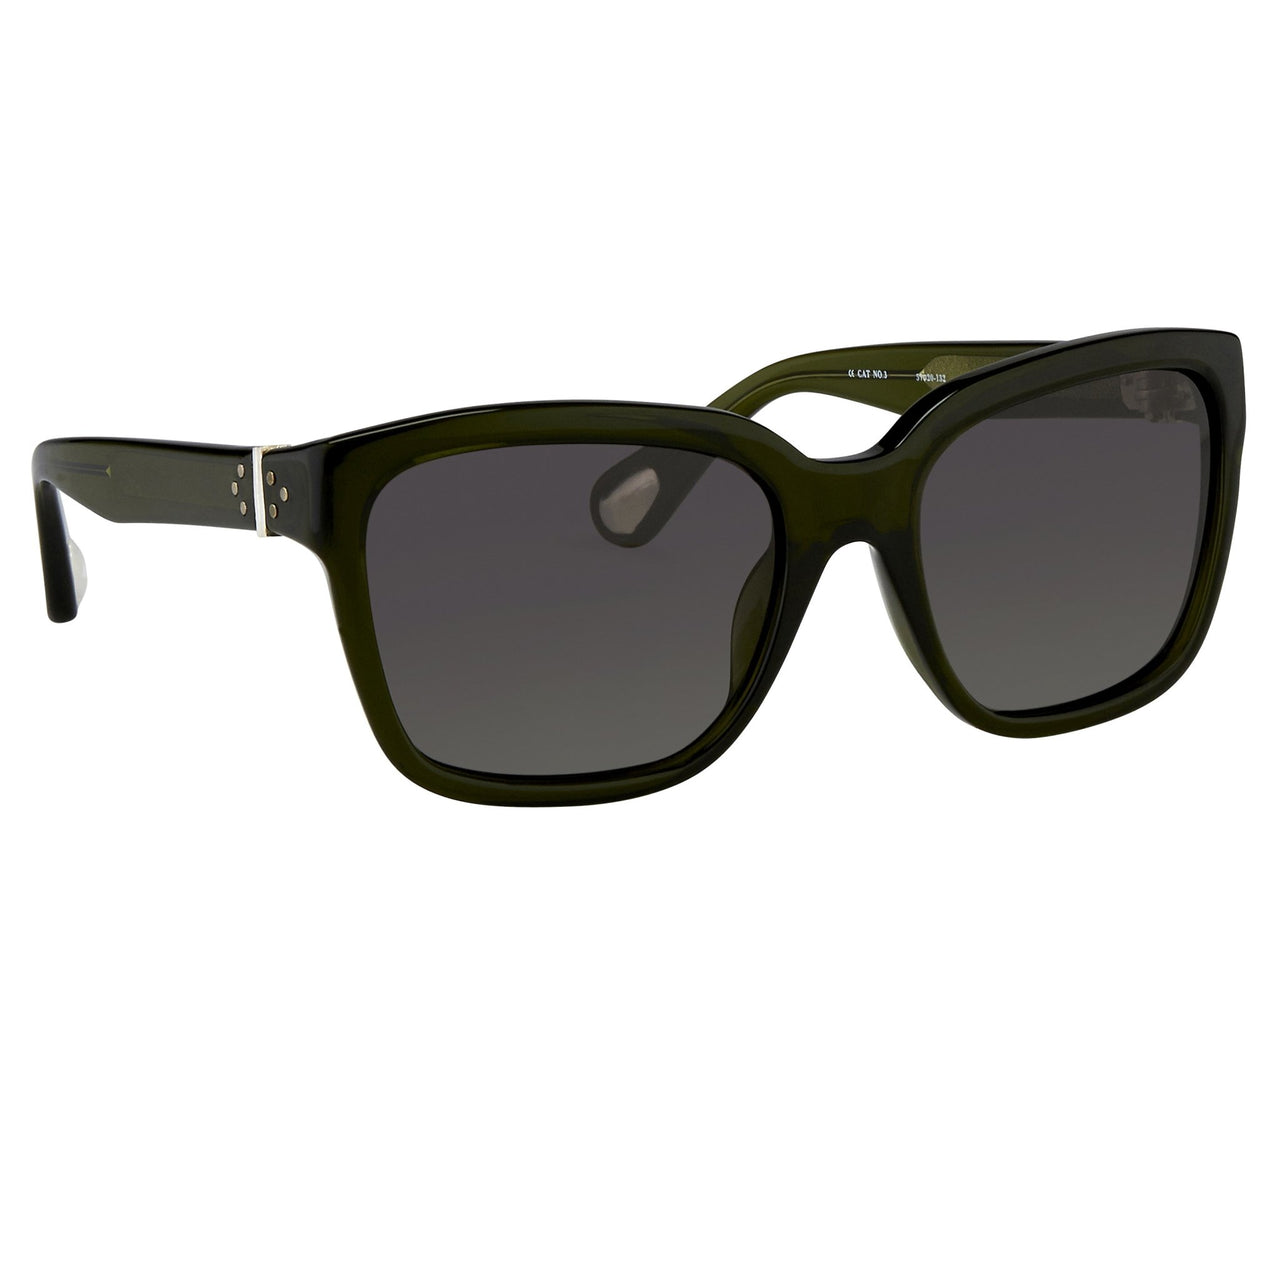 Ann Demeulemeester Sunglasses D-Frame Green 925 Silver with Green Graduated Lenses Category 3 AD9C7SUN - Watches & Crystals